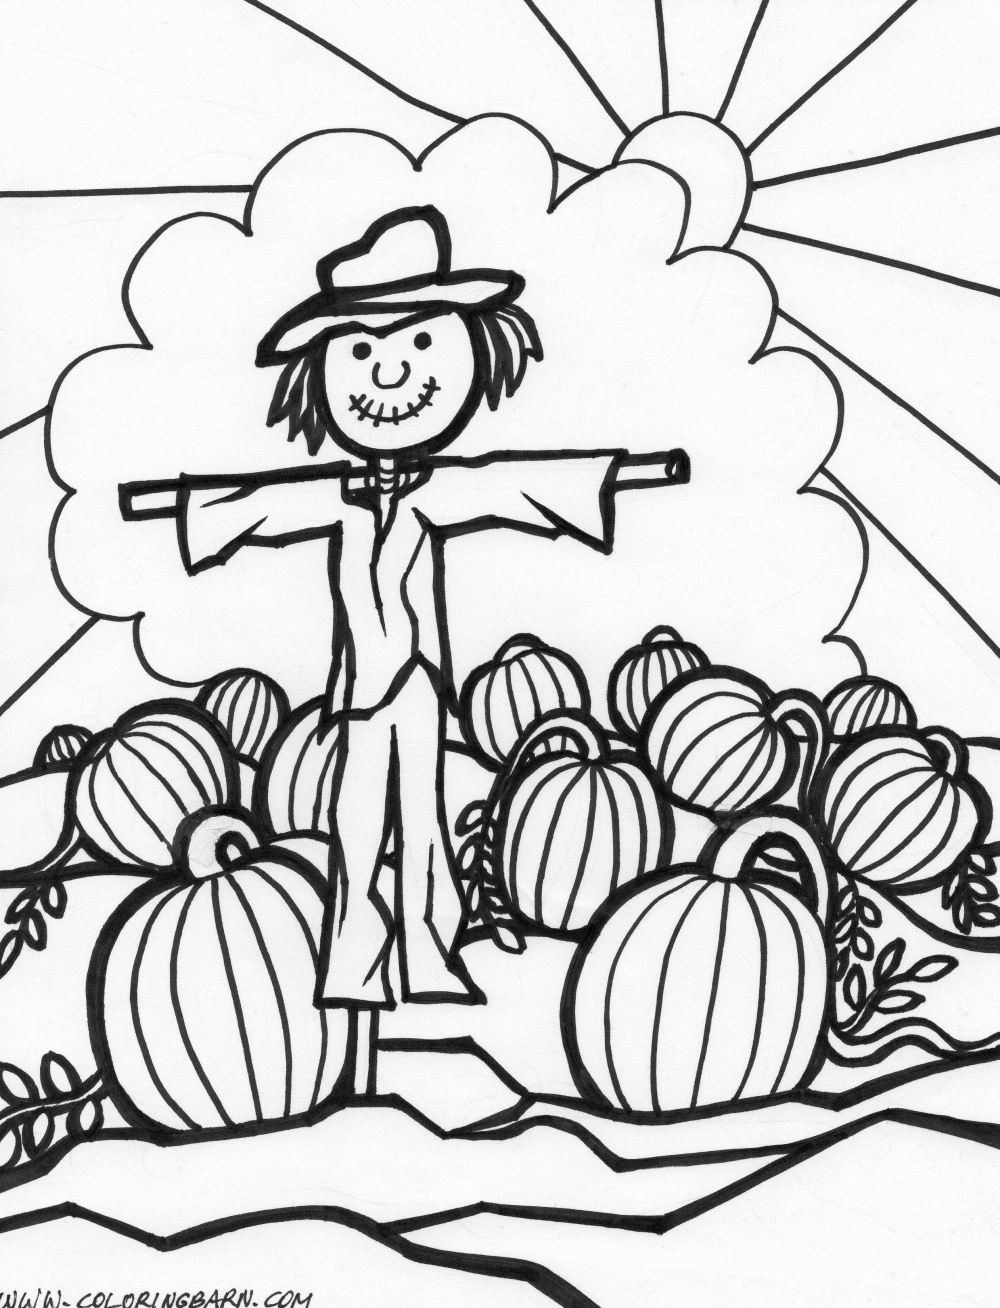 Coloring Pages Of Pumpkins 9